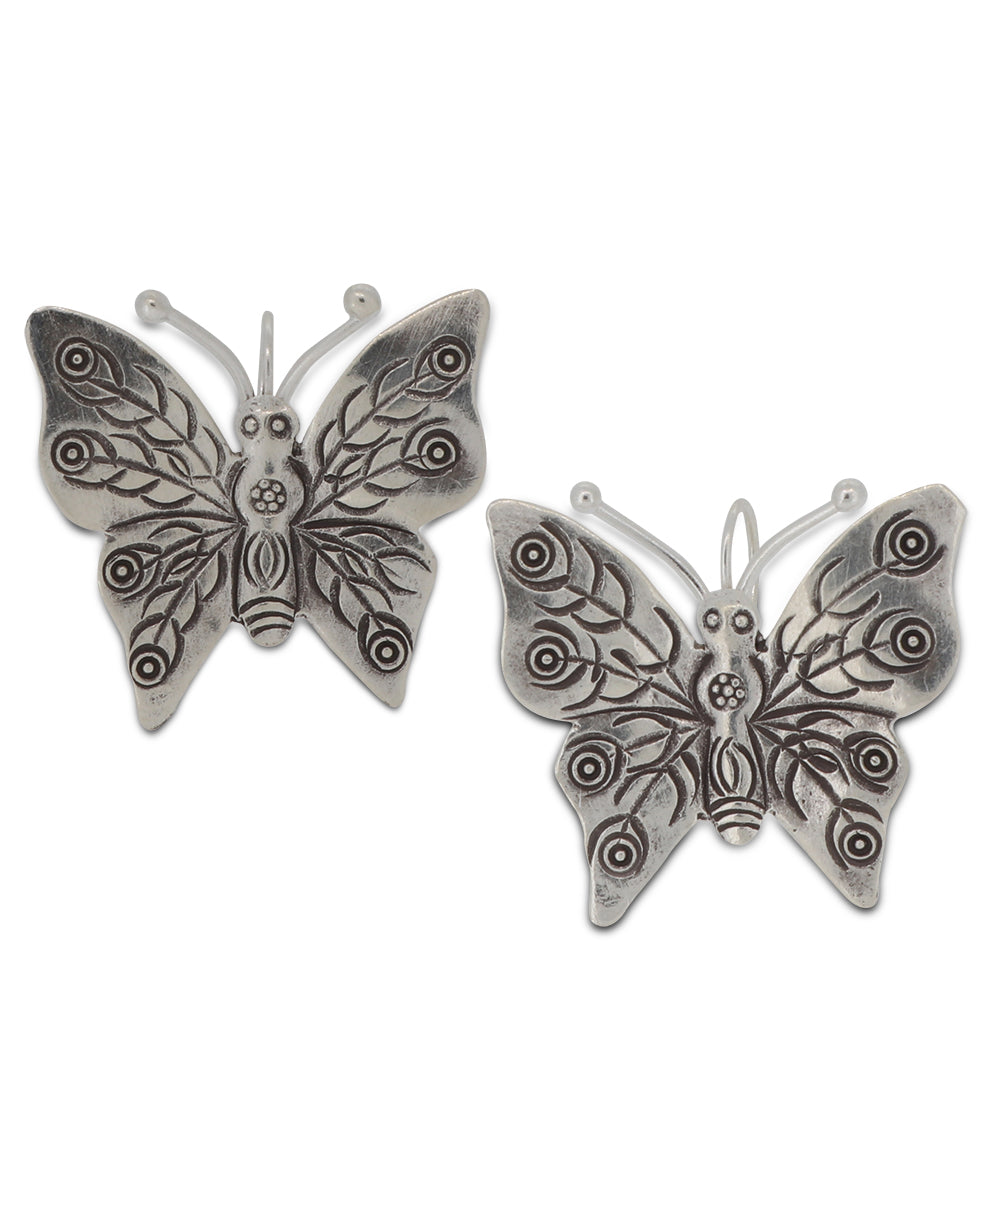 Exquisite handcrafted silver butterfly earrings inspired by nature and Laotian artistry